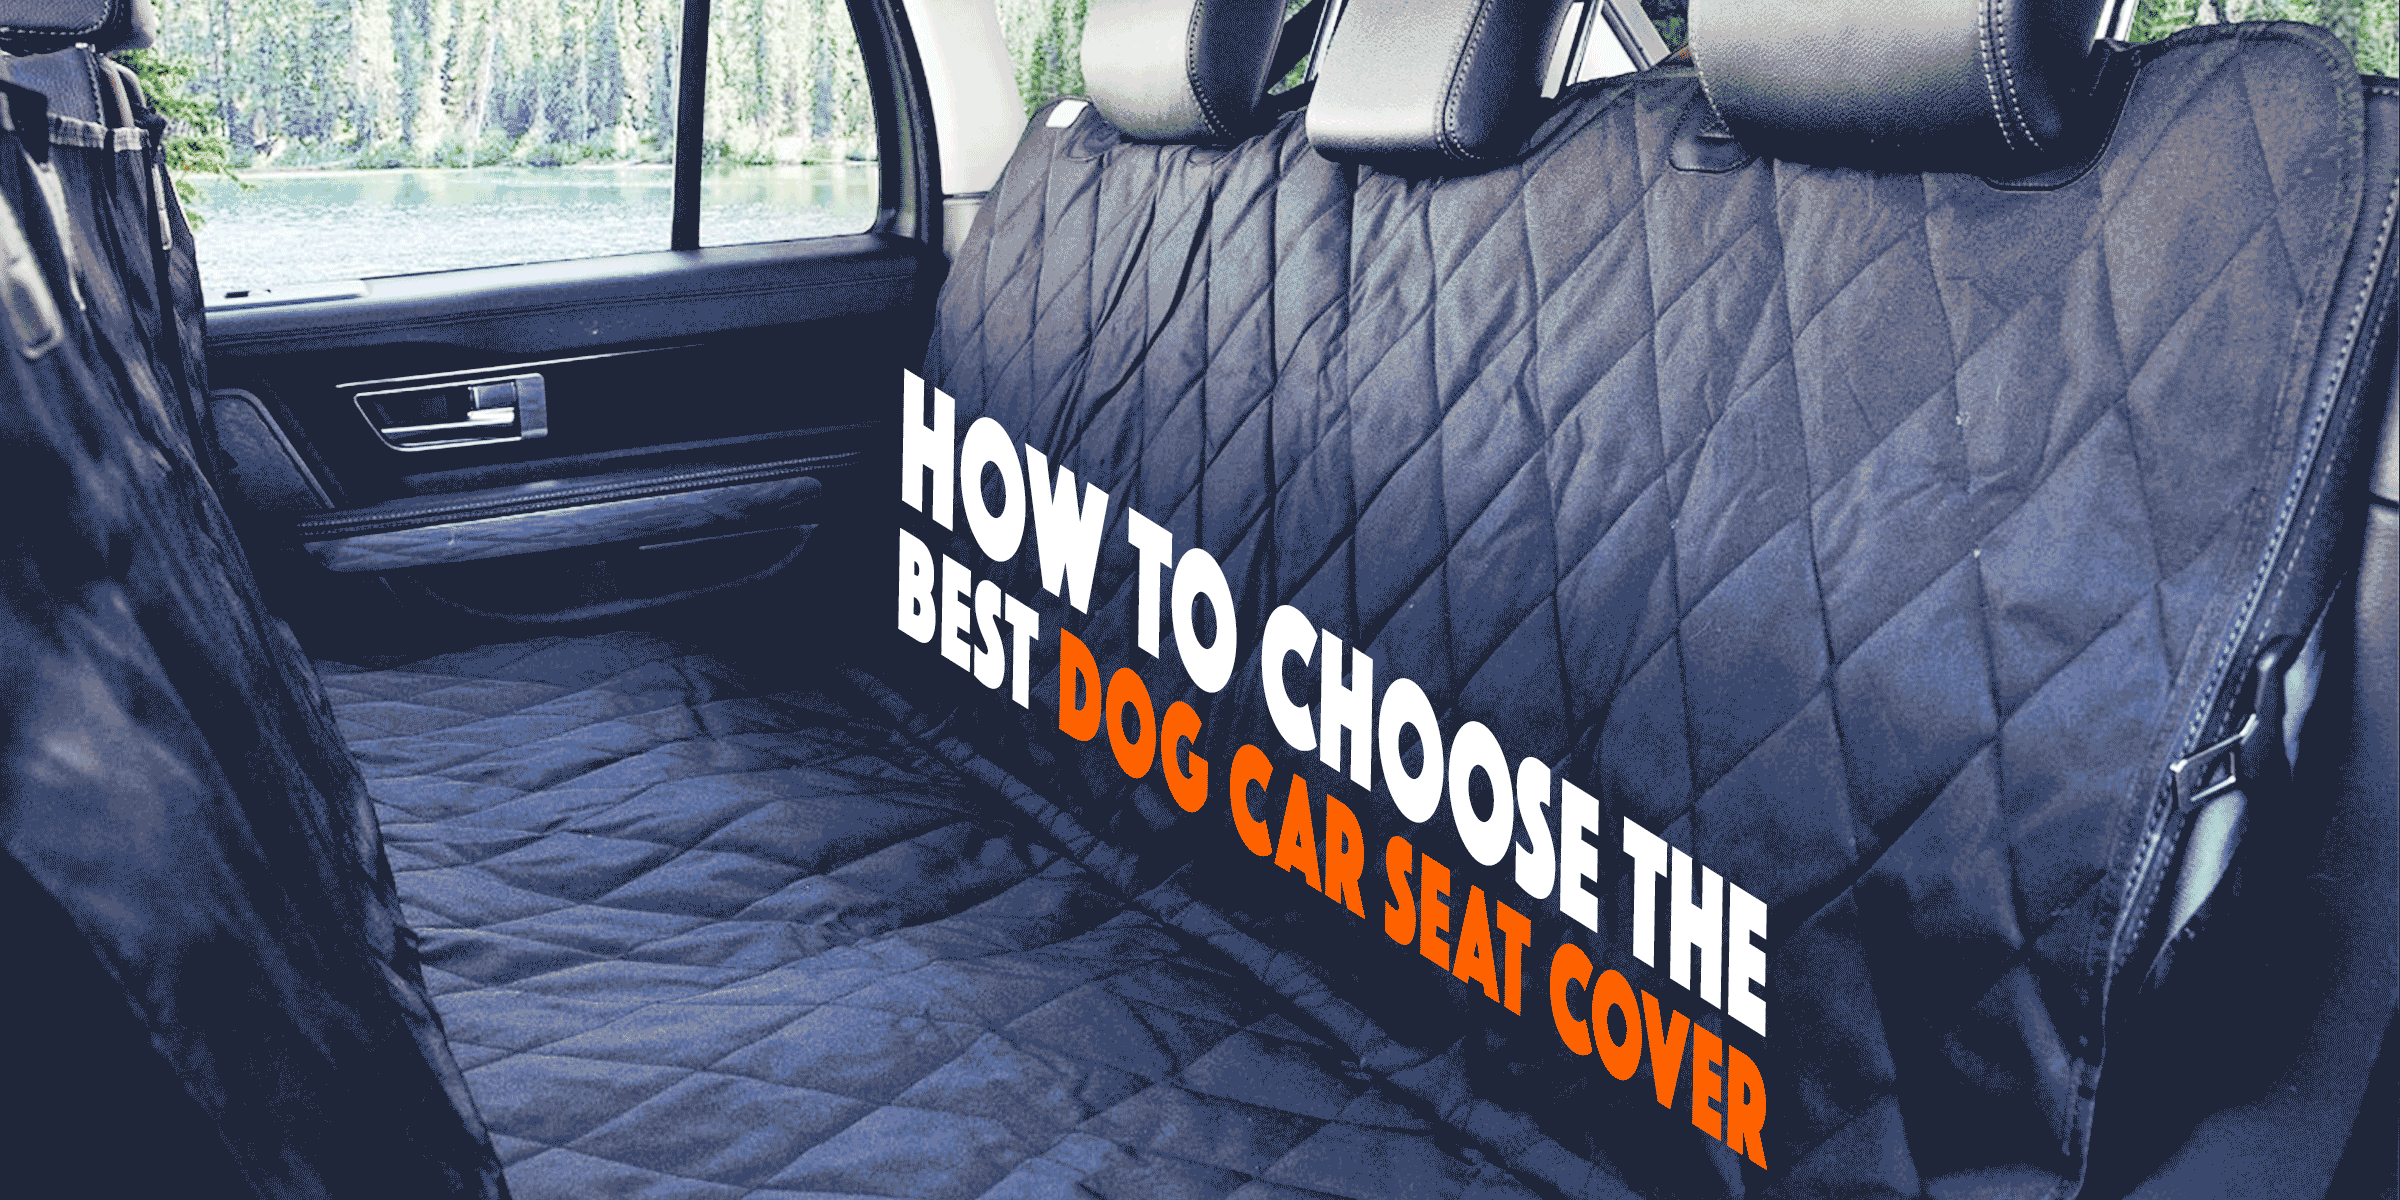 3 Best Dog Car Seat Covers for SUVs, Cars & Trucks (2020 Reviews!)